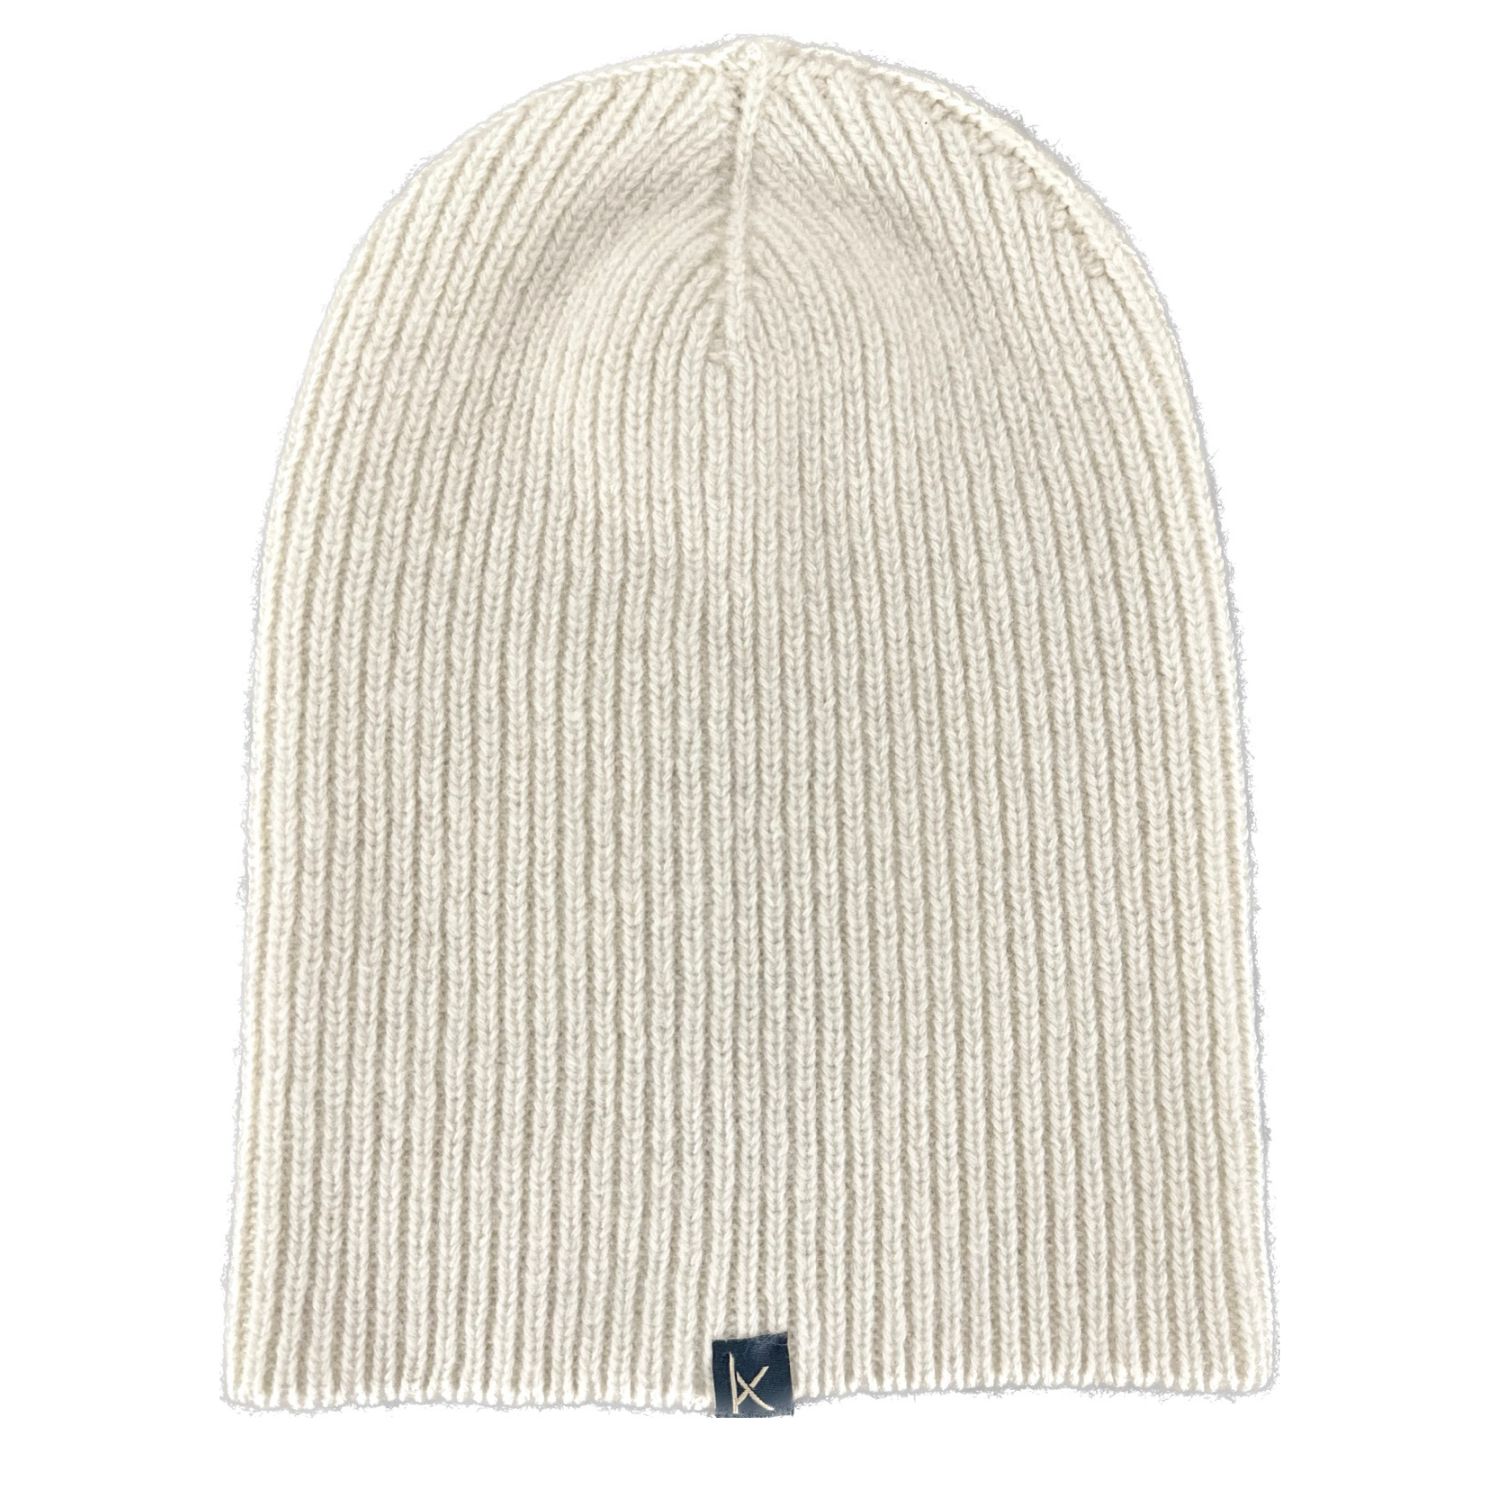 White Deluxe Knitted Cashmere Beanie Hat